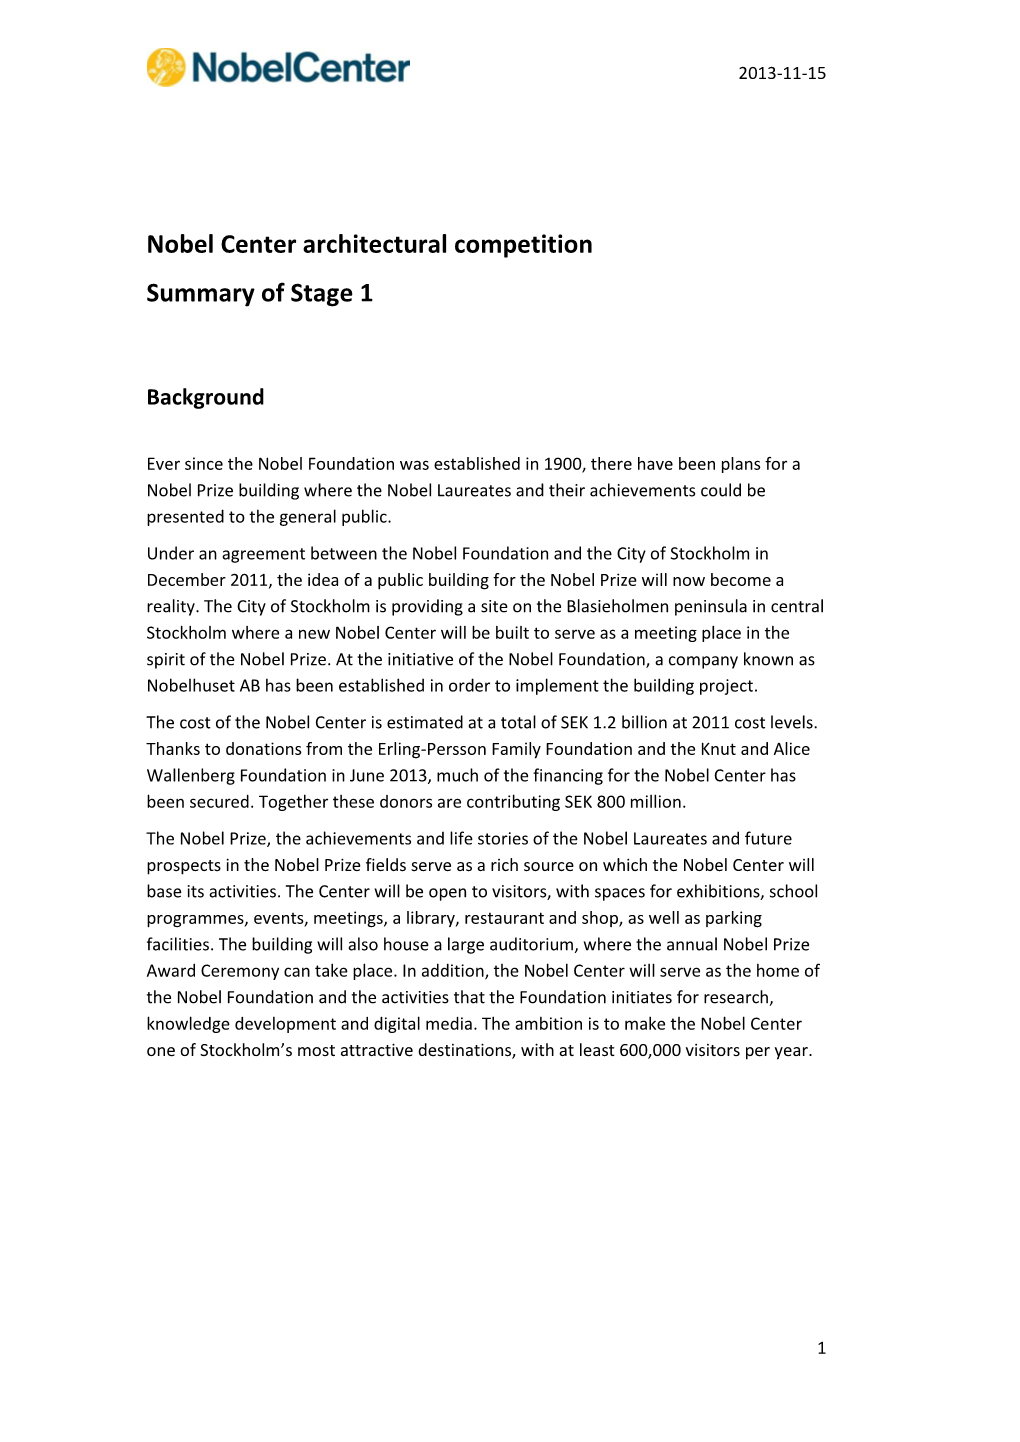 Nobel Center Architectural Competition Summary of Stage 1